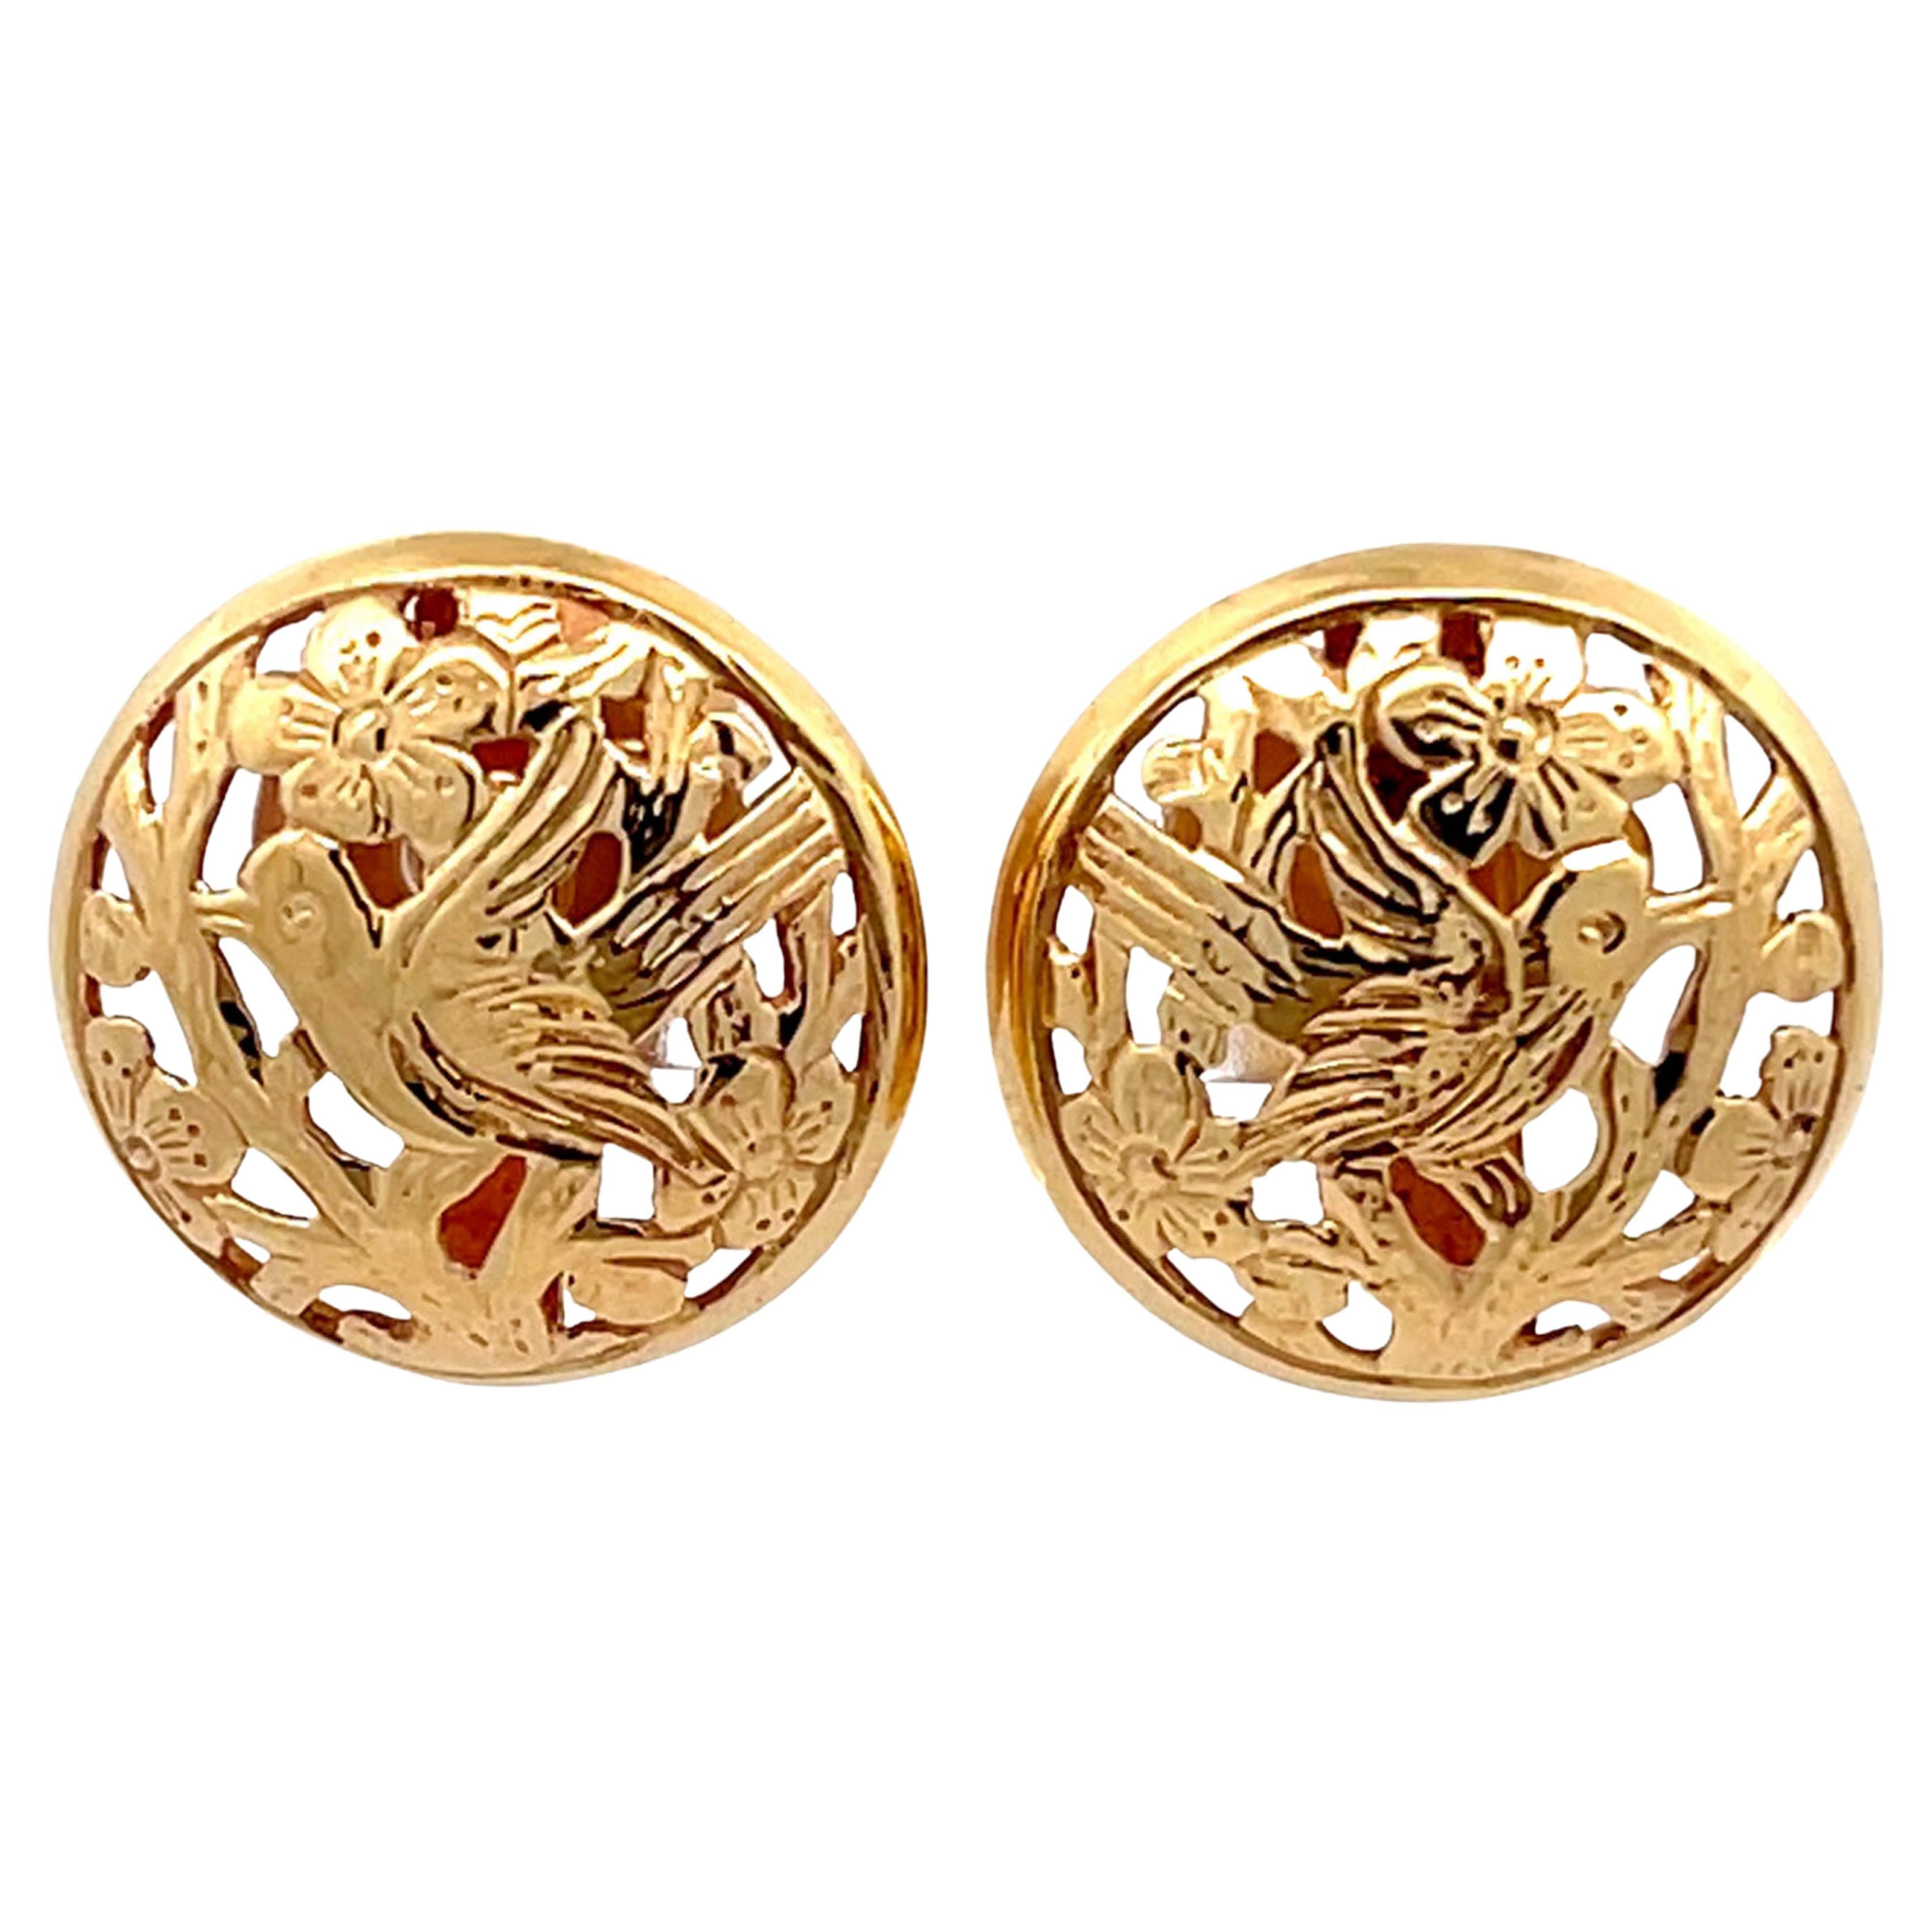 Mings Pierced Bird on a Plum Round Stud Earrings in 14k Yellow Gold For Sale